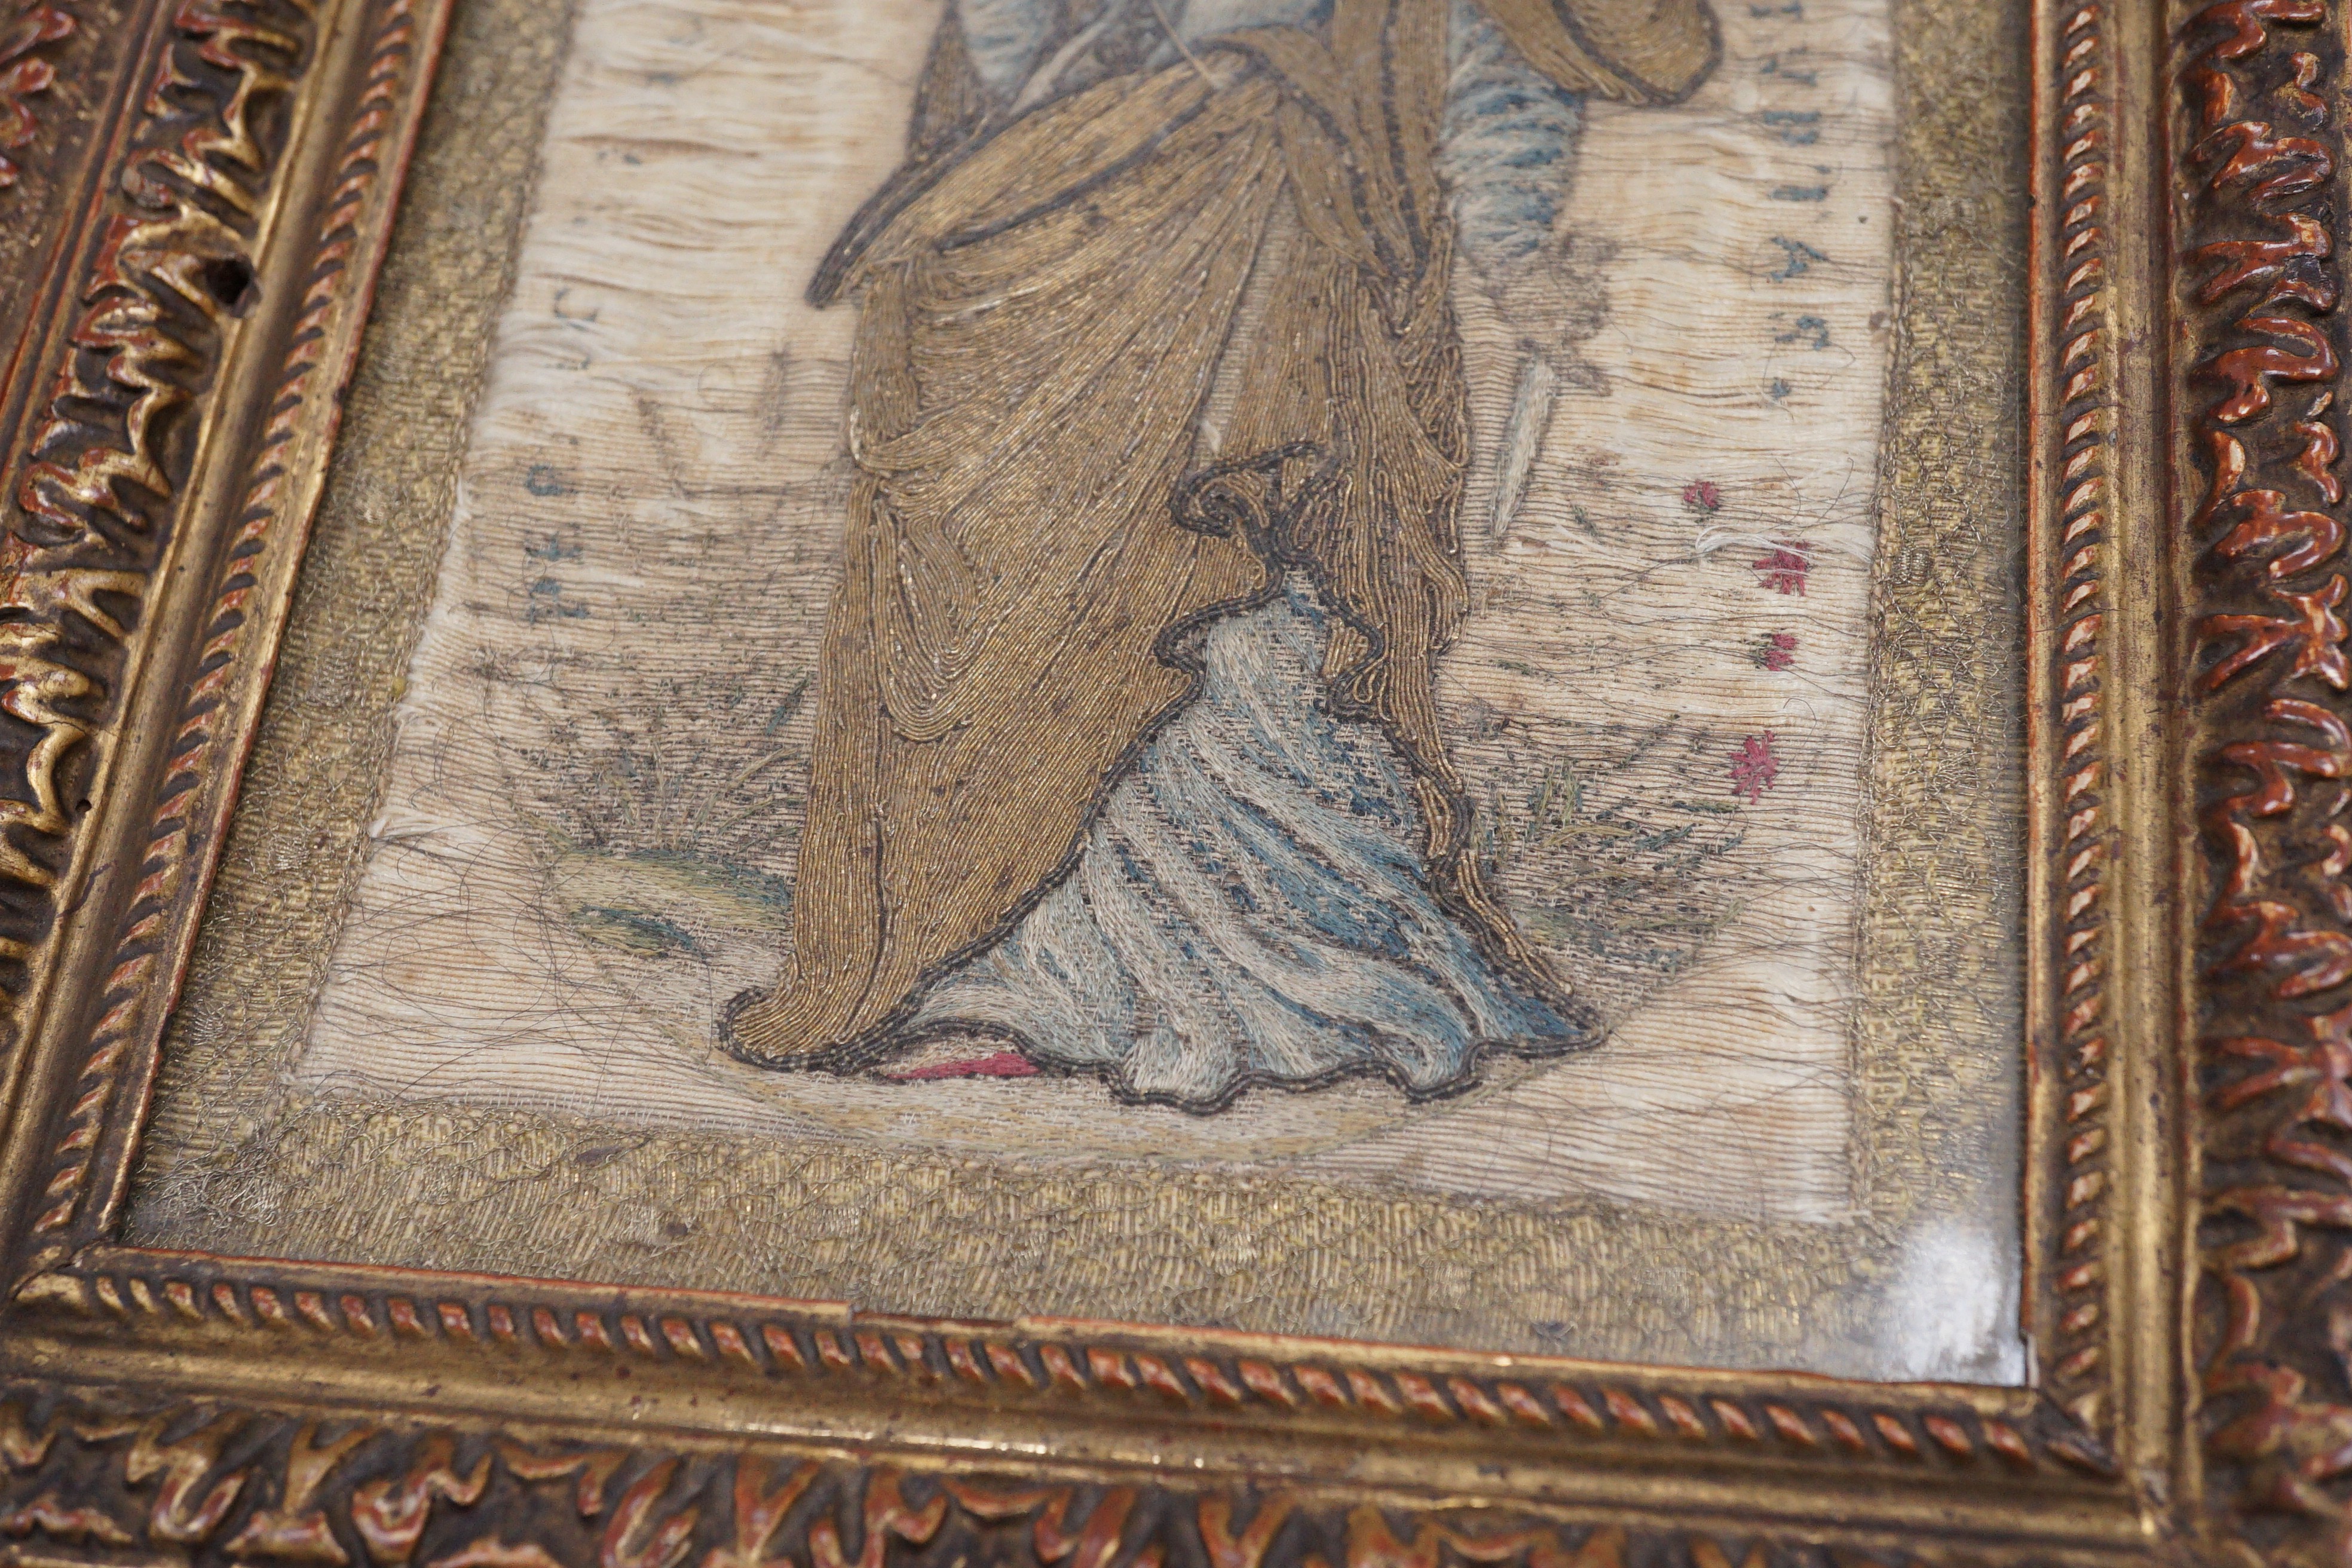 A pair of 18th century Italian embroideries in gilt frames, 24 x 19cm